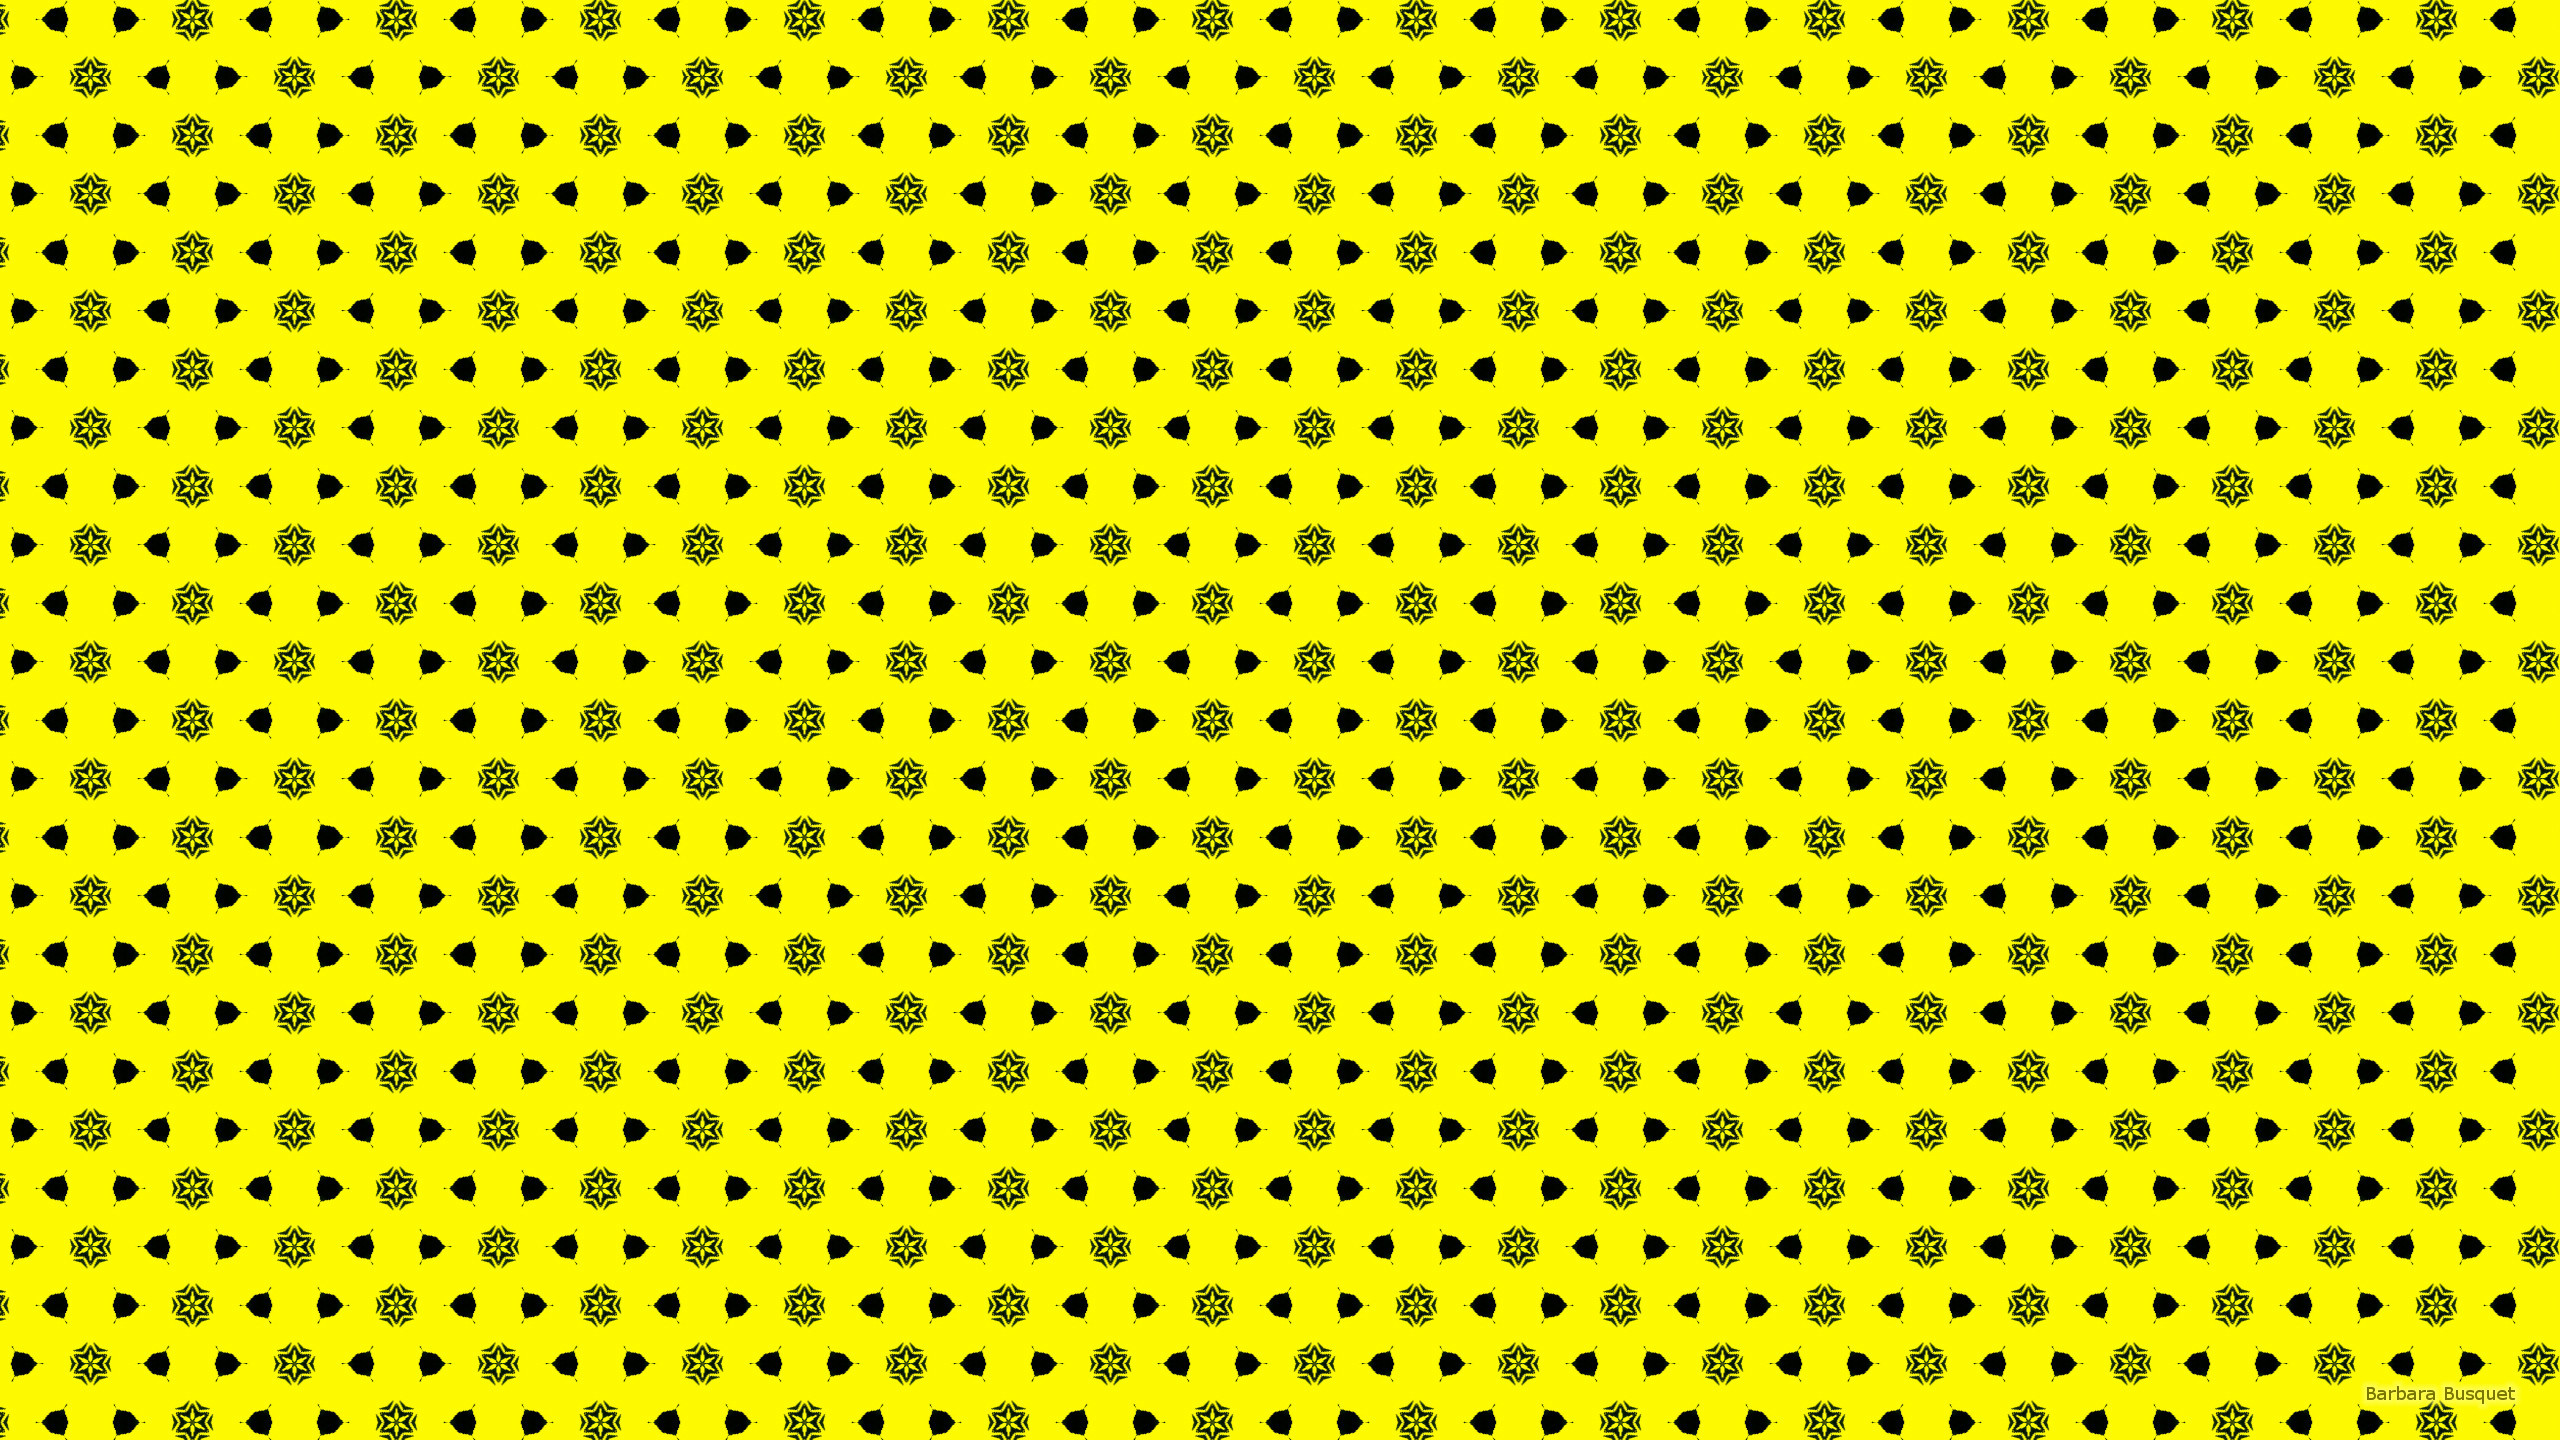 2560x1440 Yellow wallpaper with black shapes